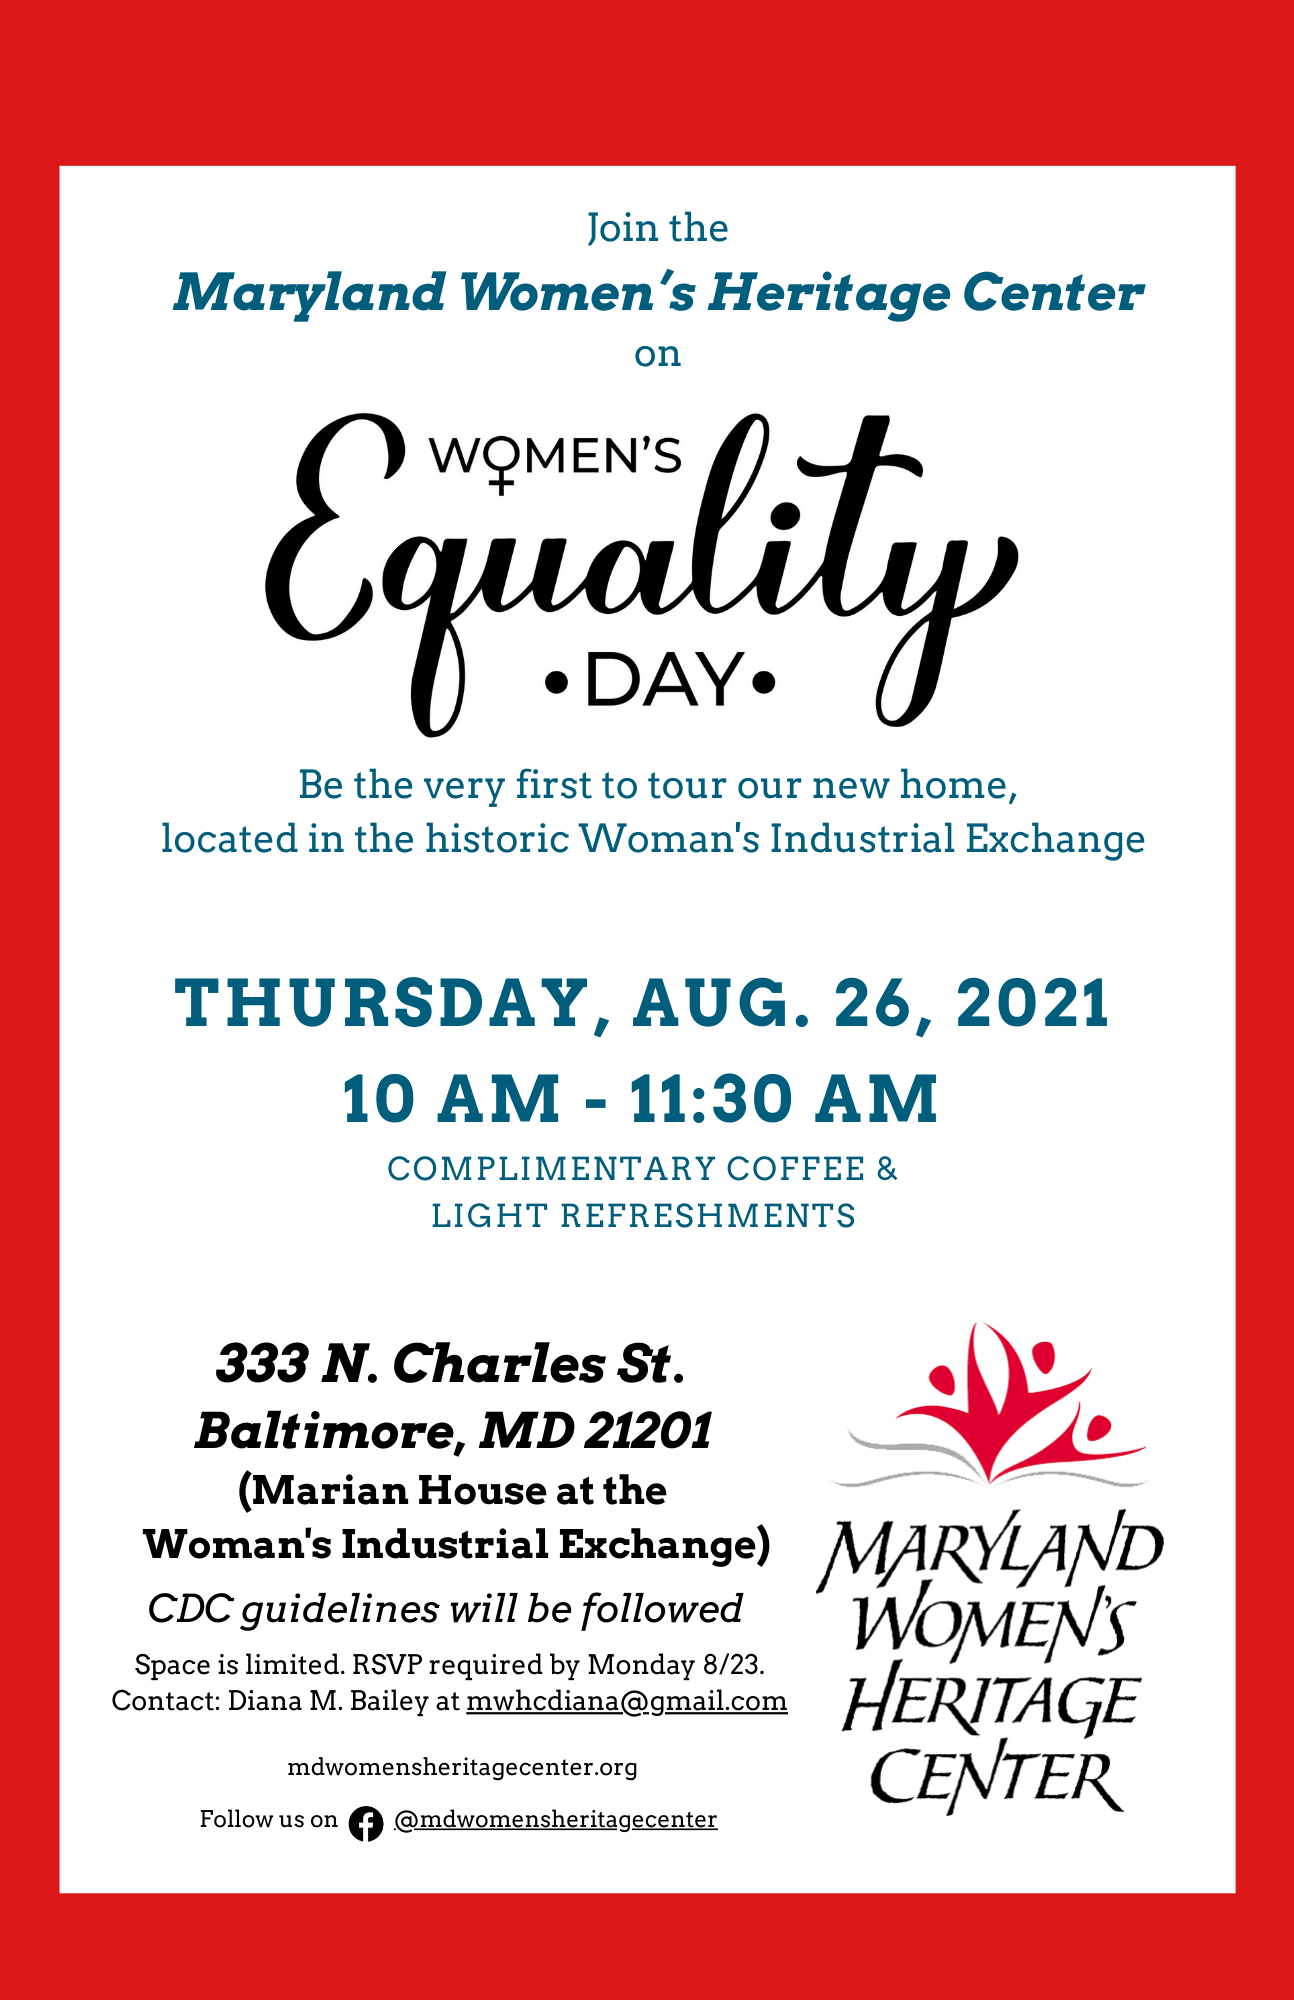 Flier advertising Women's Equality Day at Maryland Women's Heritage Center, Thursday August 24, 2021